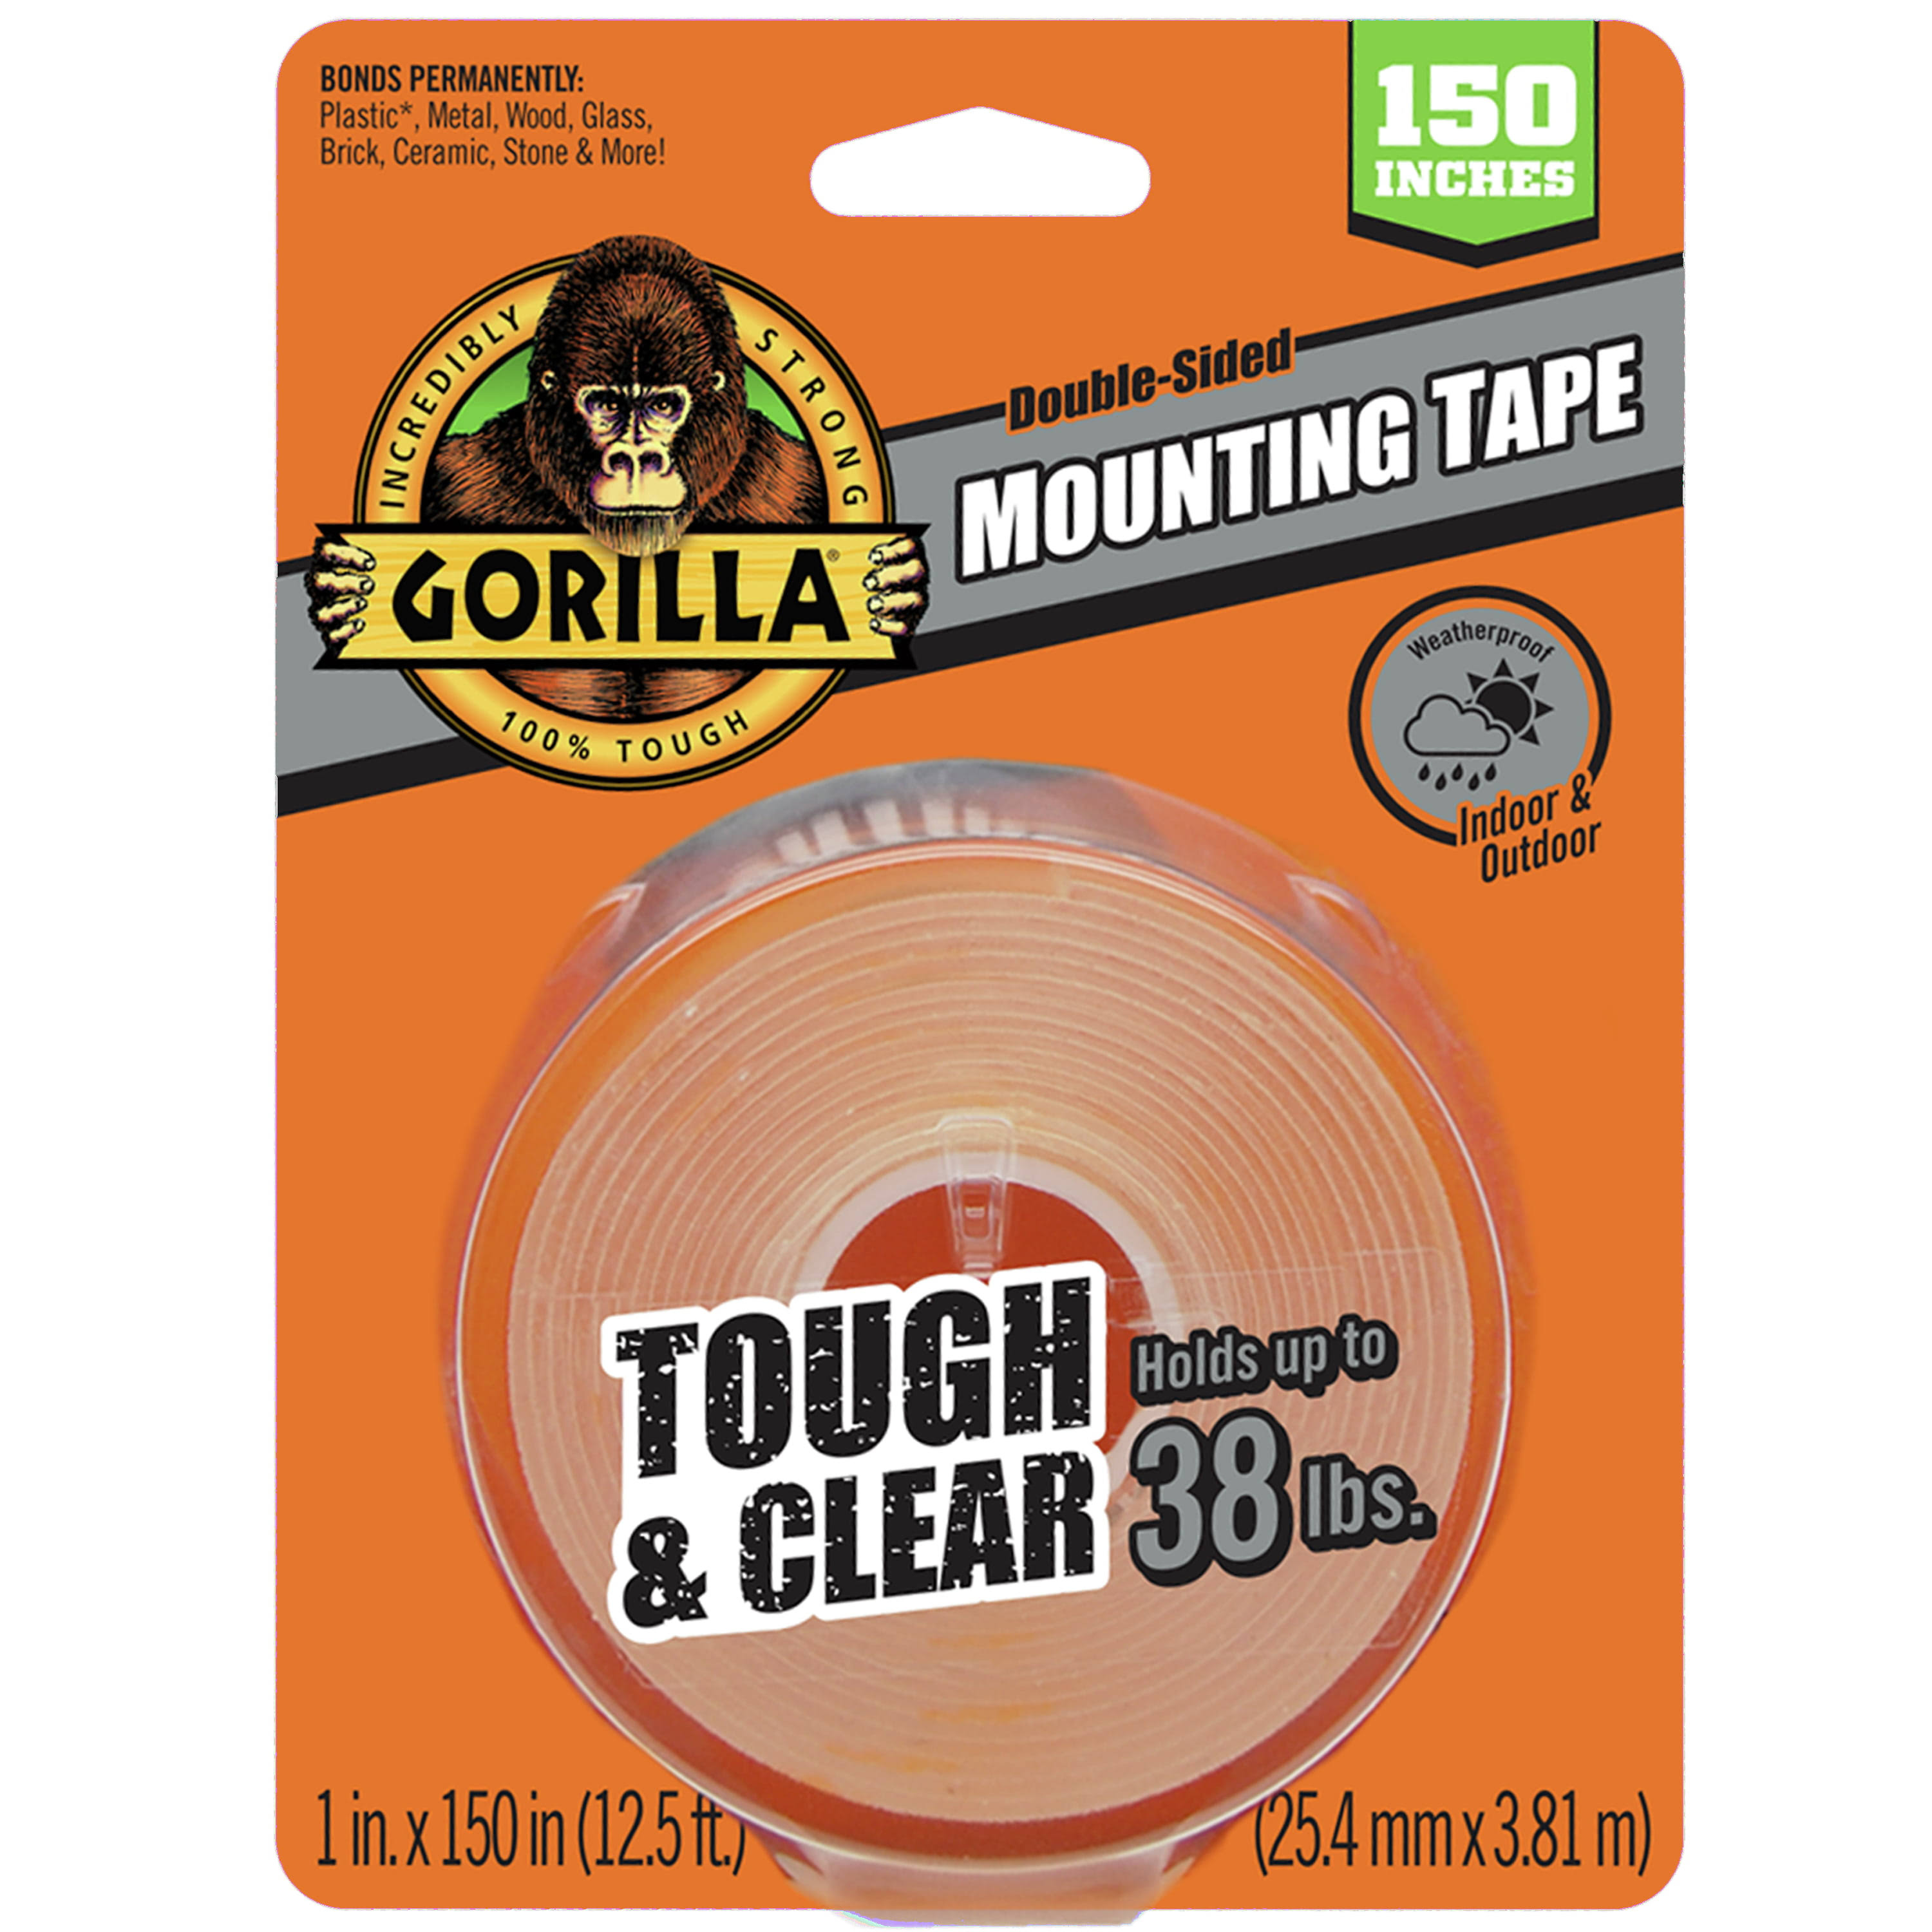 Gorilla 1 In. x 150 In. Tough & Clear Double-Sided Mounting Tape (38 Lb. Capacity) 6036002